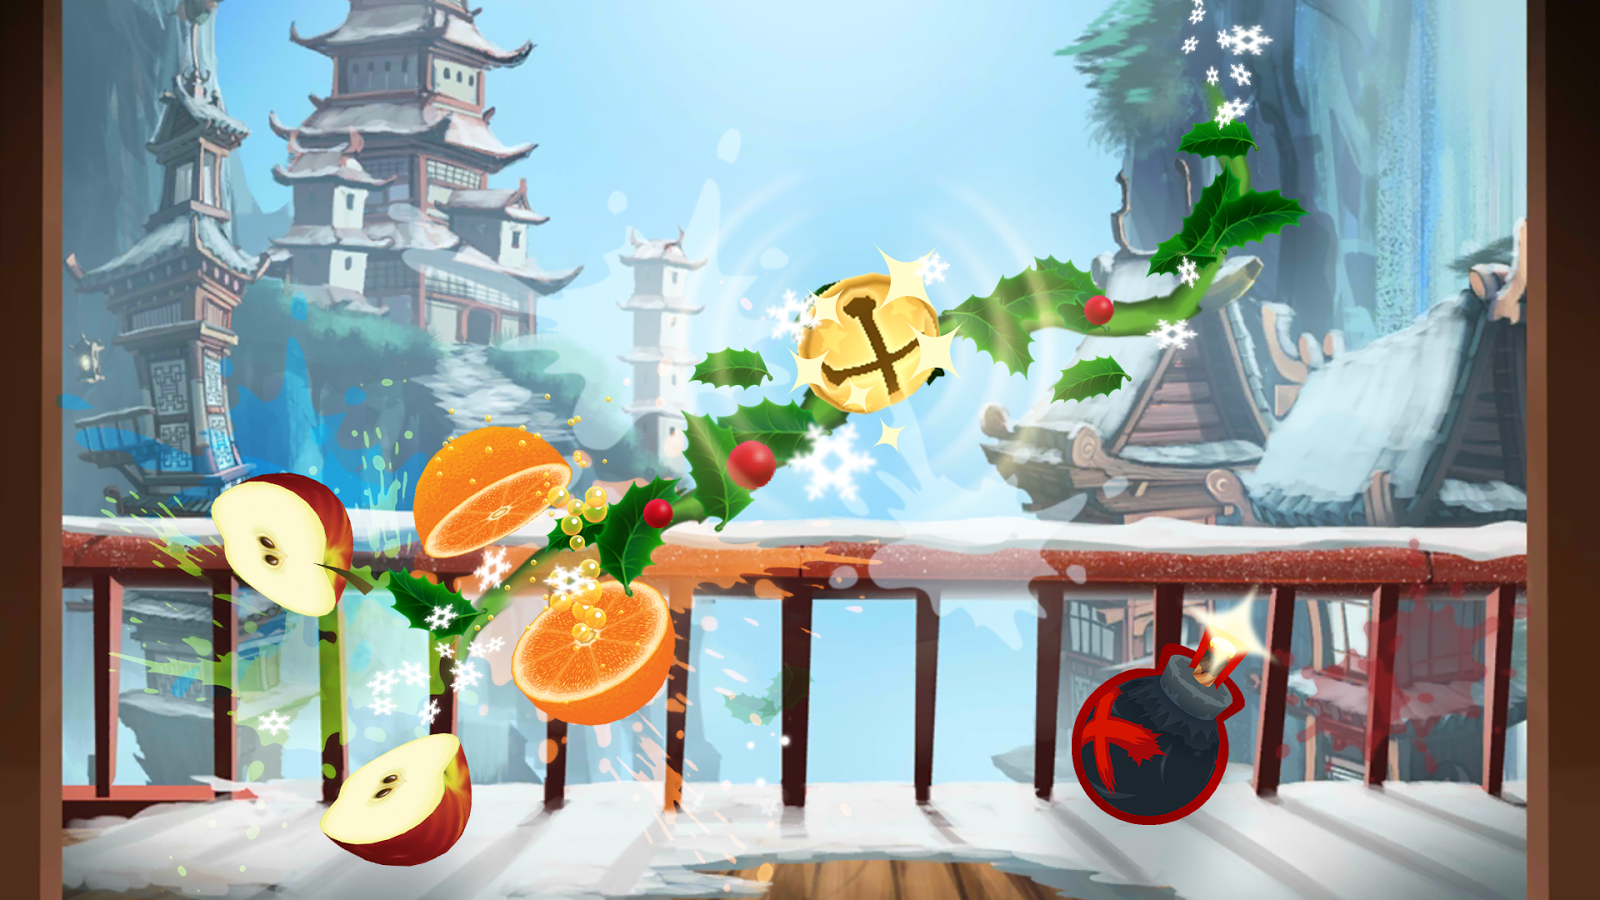 Fruit Ninja Download latest APK for Android (3.47.0)